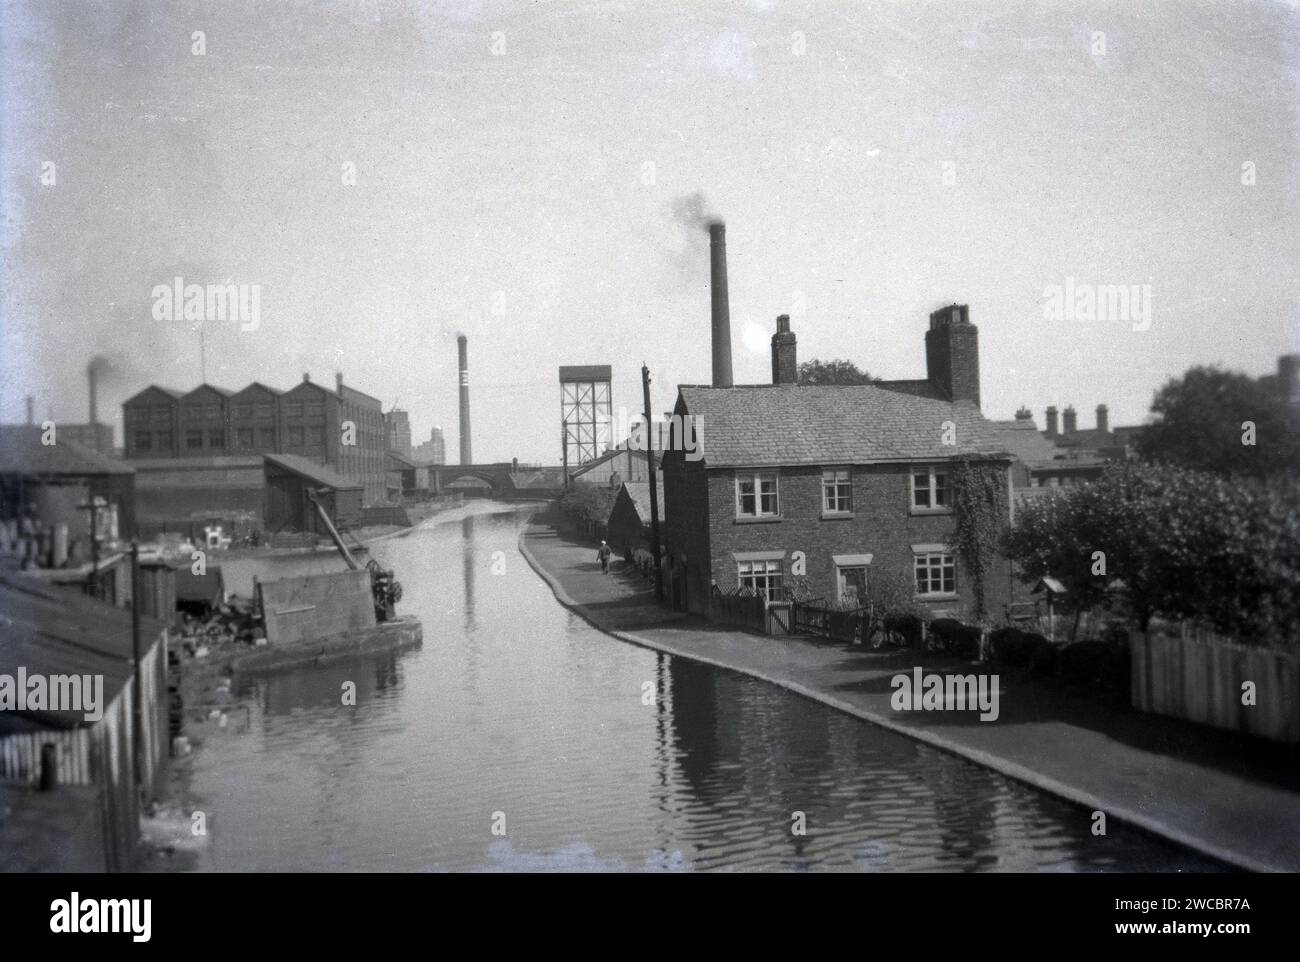 1941, historical, a view from this era of the Bridgewater Canal at Leigh, showing waterside buildings with several smoking chimneys. Opened in 1761, the waterway was built by the 3rd Duke of Bridgewater to transport coal from his mines in Worsley to Manchester and links Runcorn, Manchester and Leigh in North West England, UK. Stock Photo